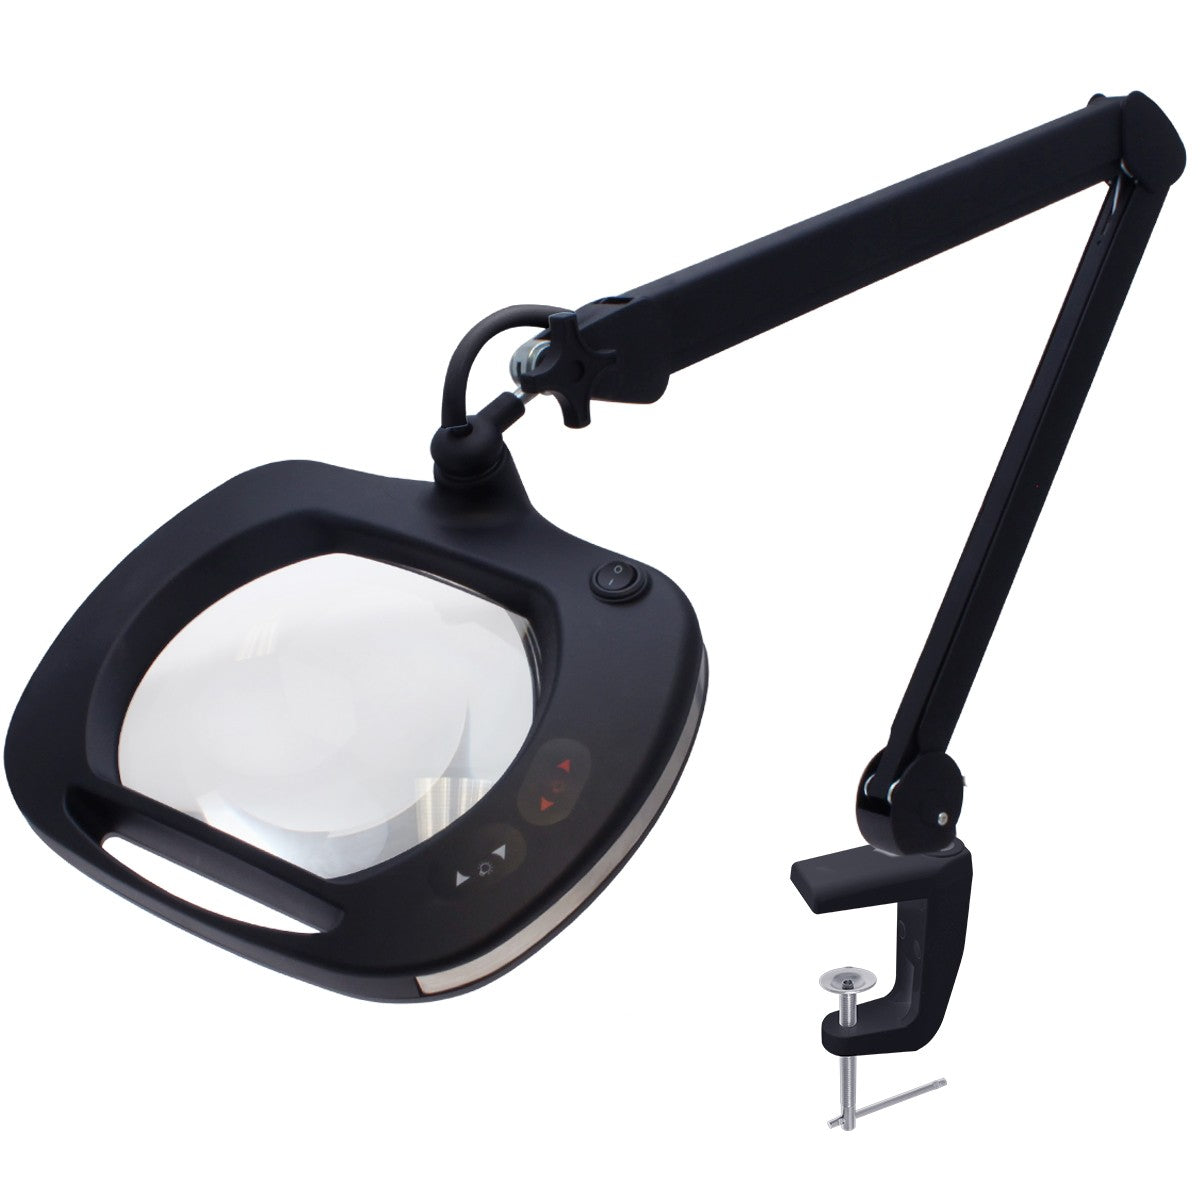 LED 2X Magnifier Desk Lamp with 5X power spot lens – The Low Vision Store